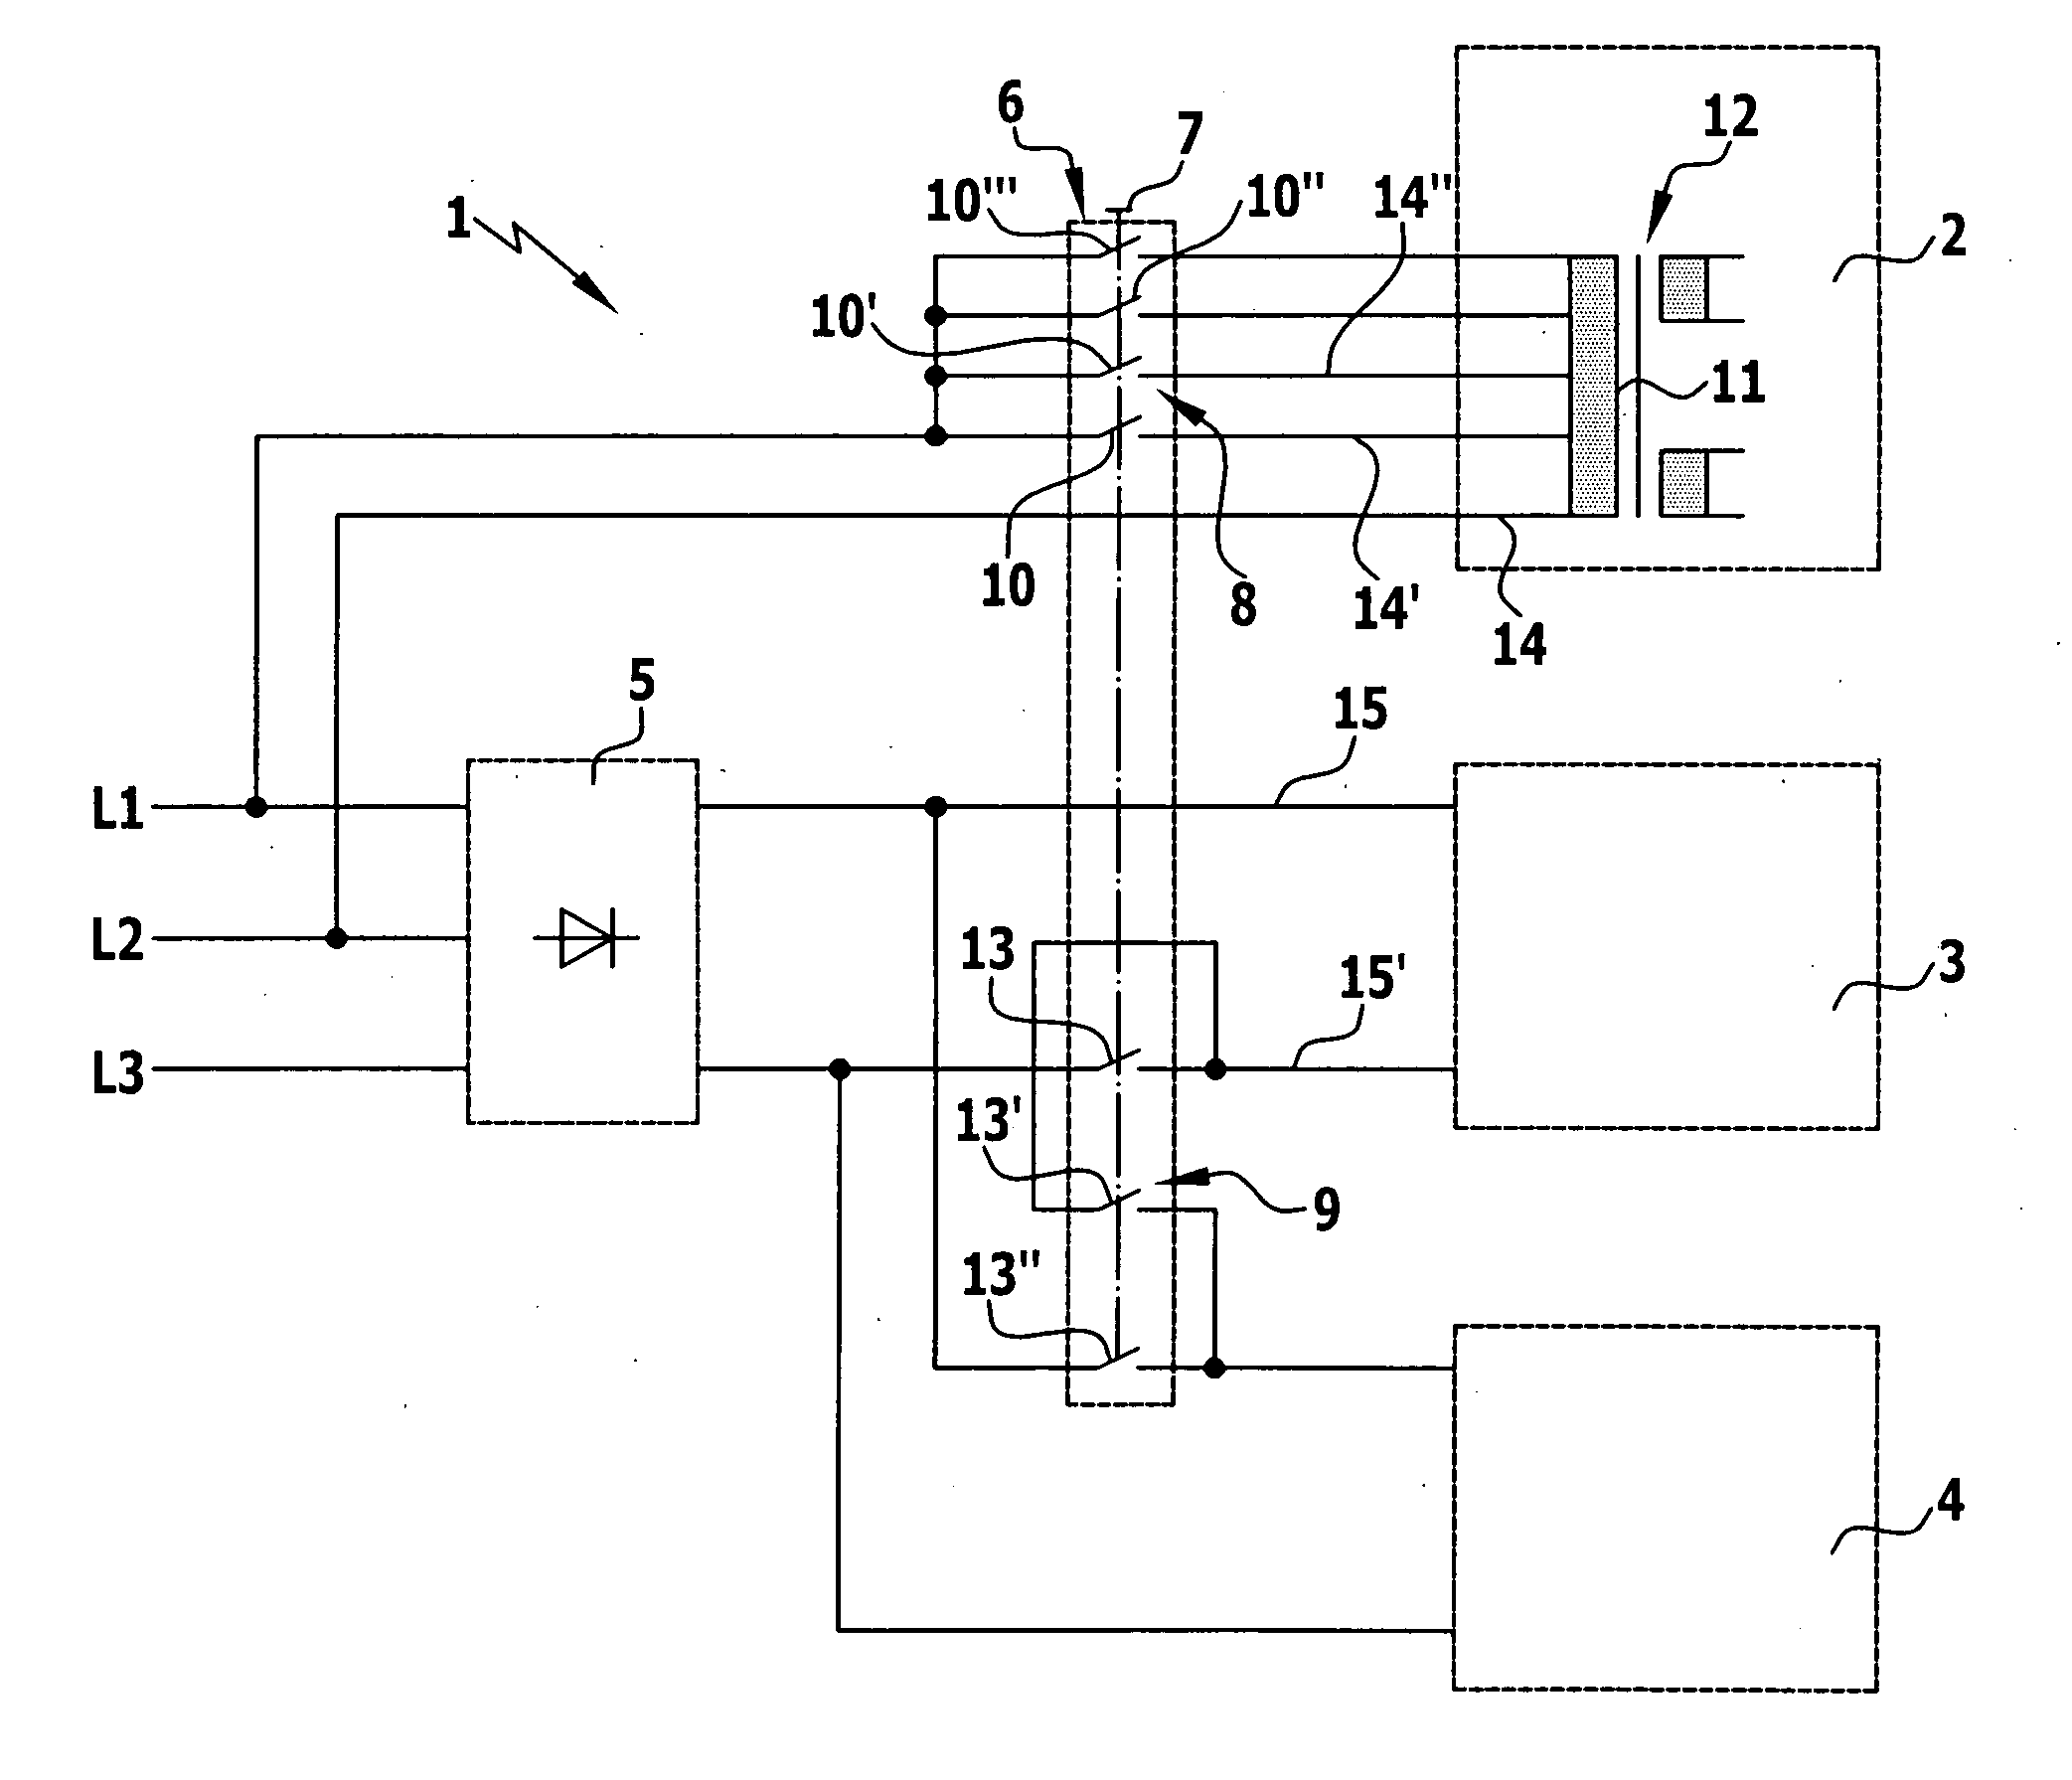 Welding current source for a welding apparatus